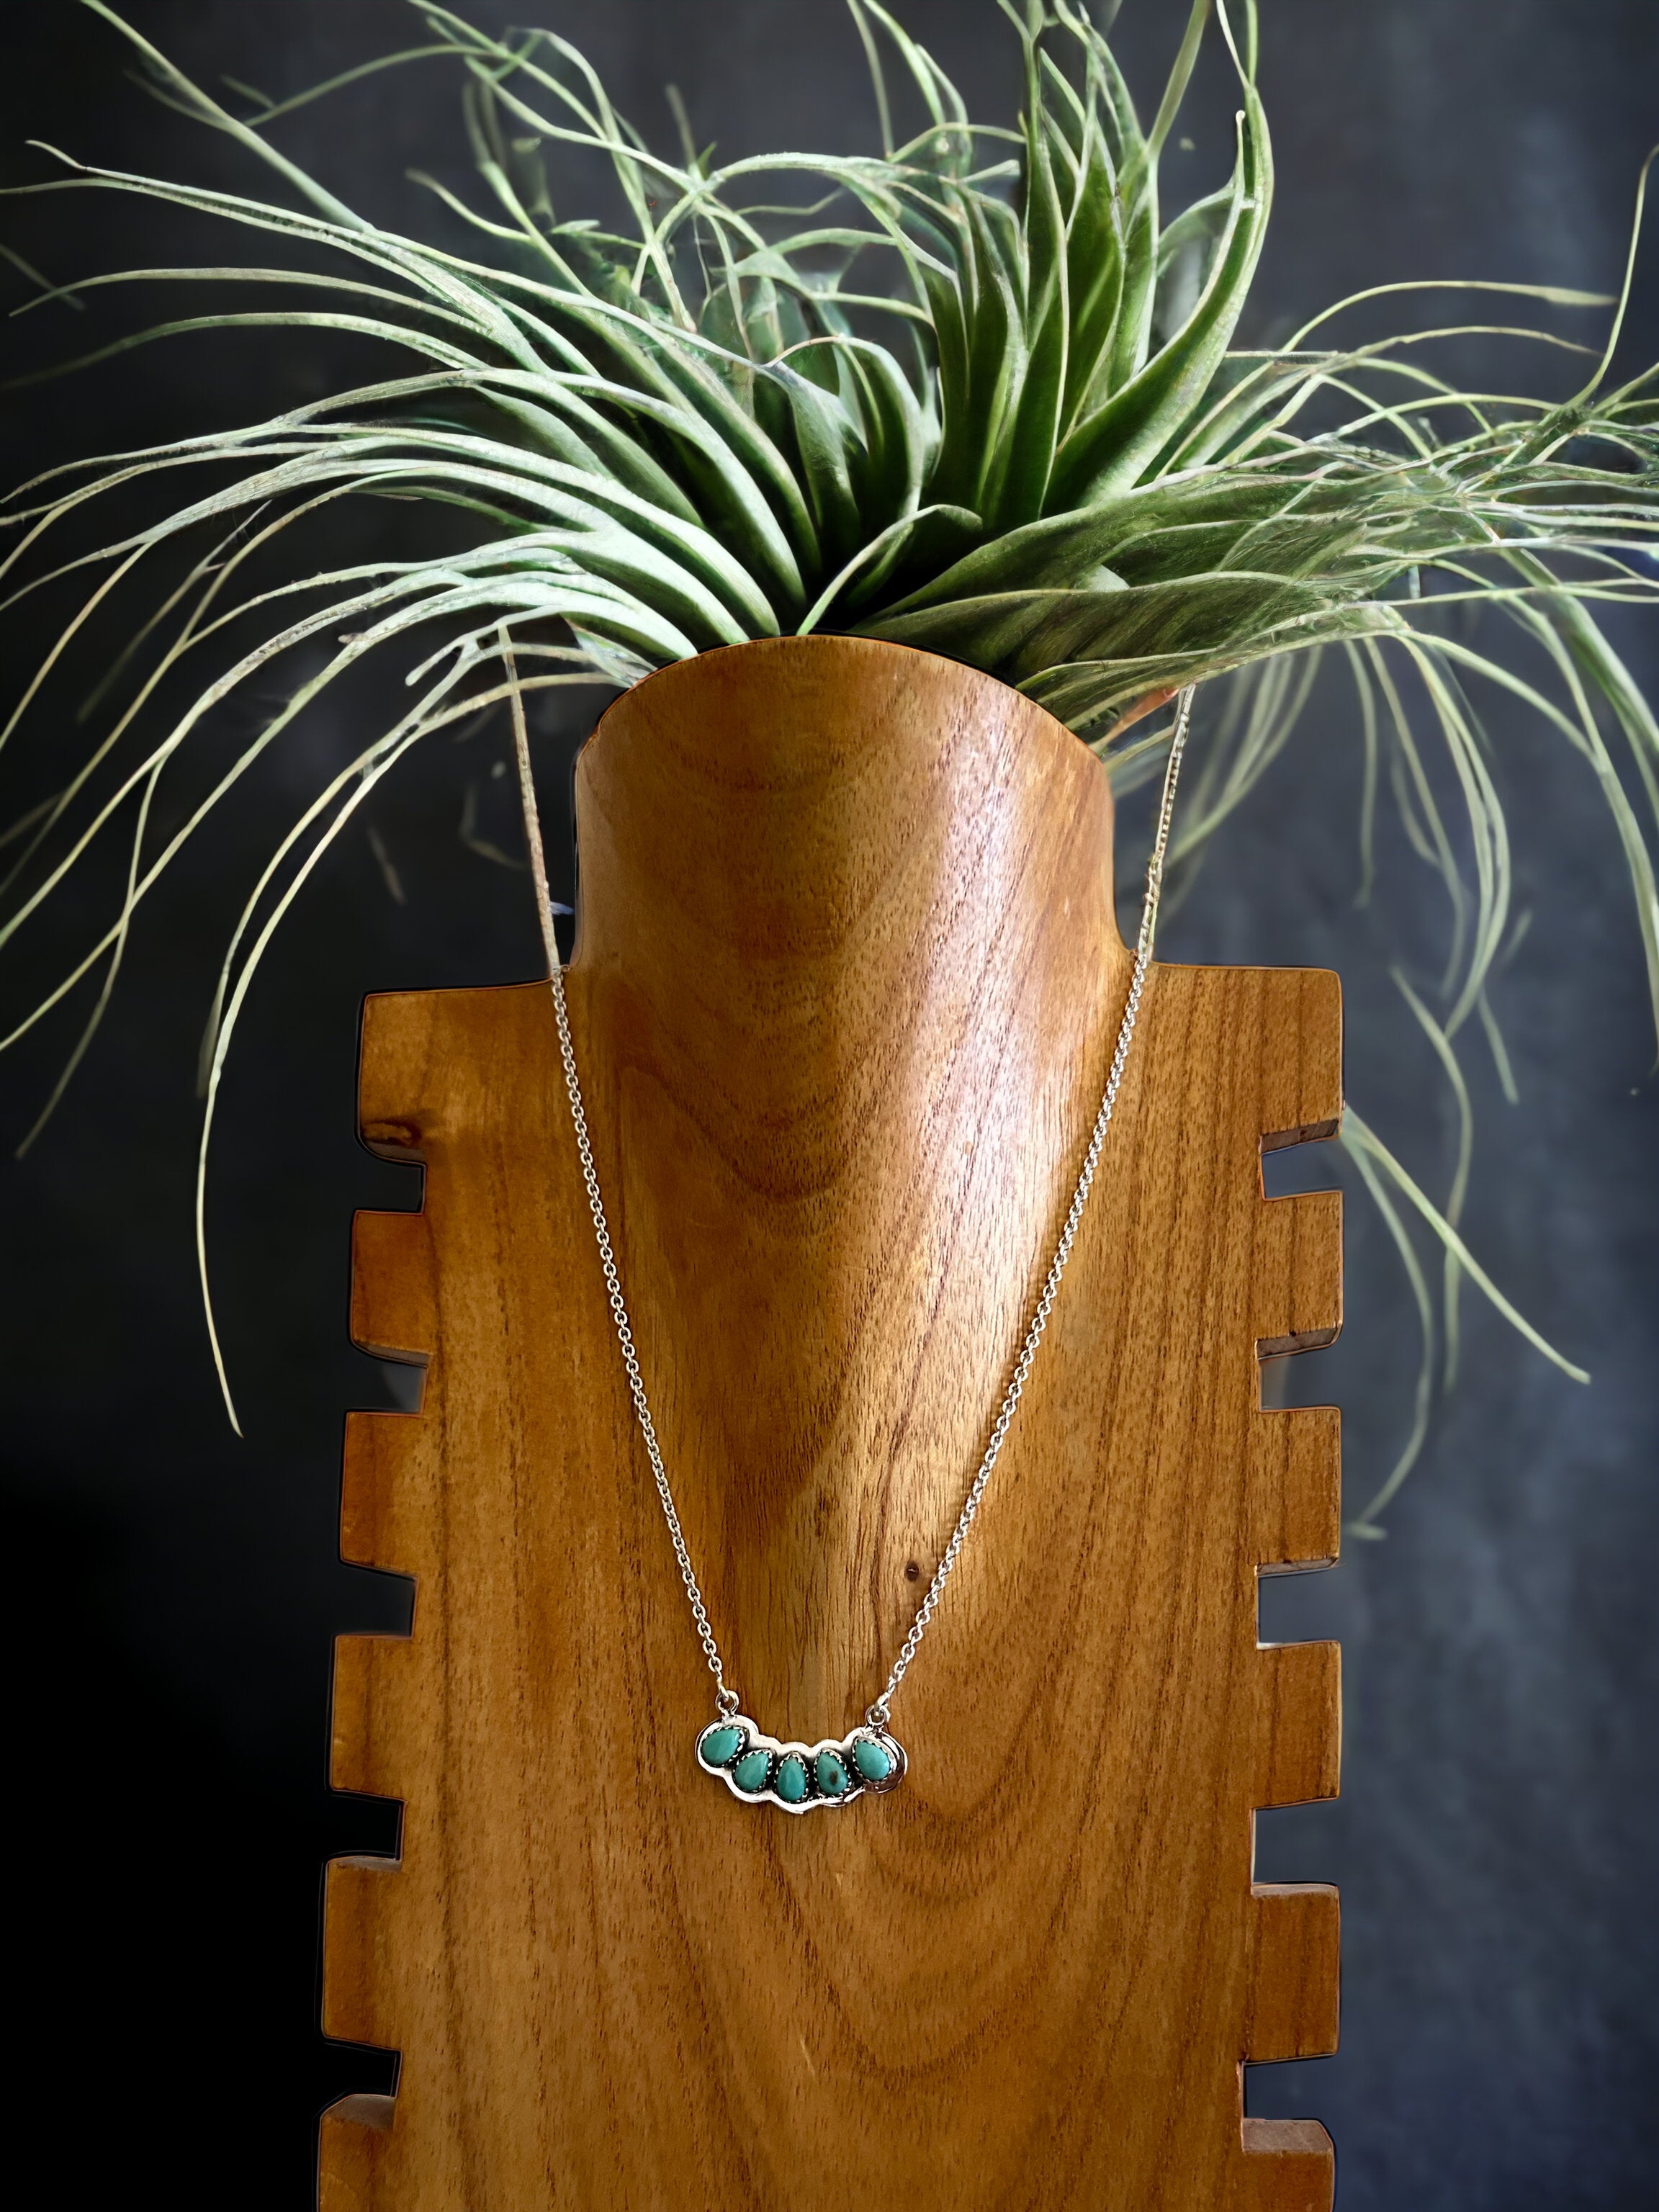 Southwest Made Kingman Turquoise & Sterling Silver Necklace